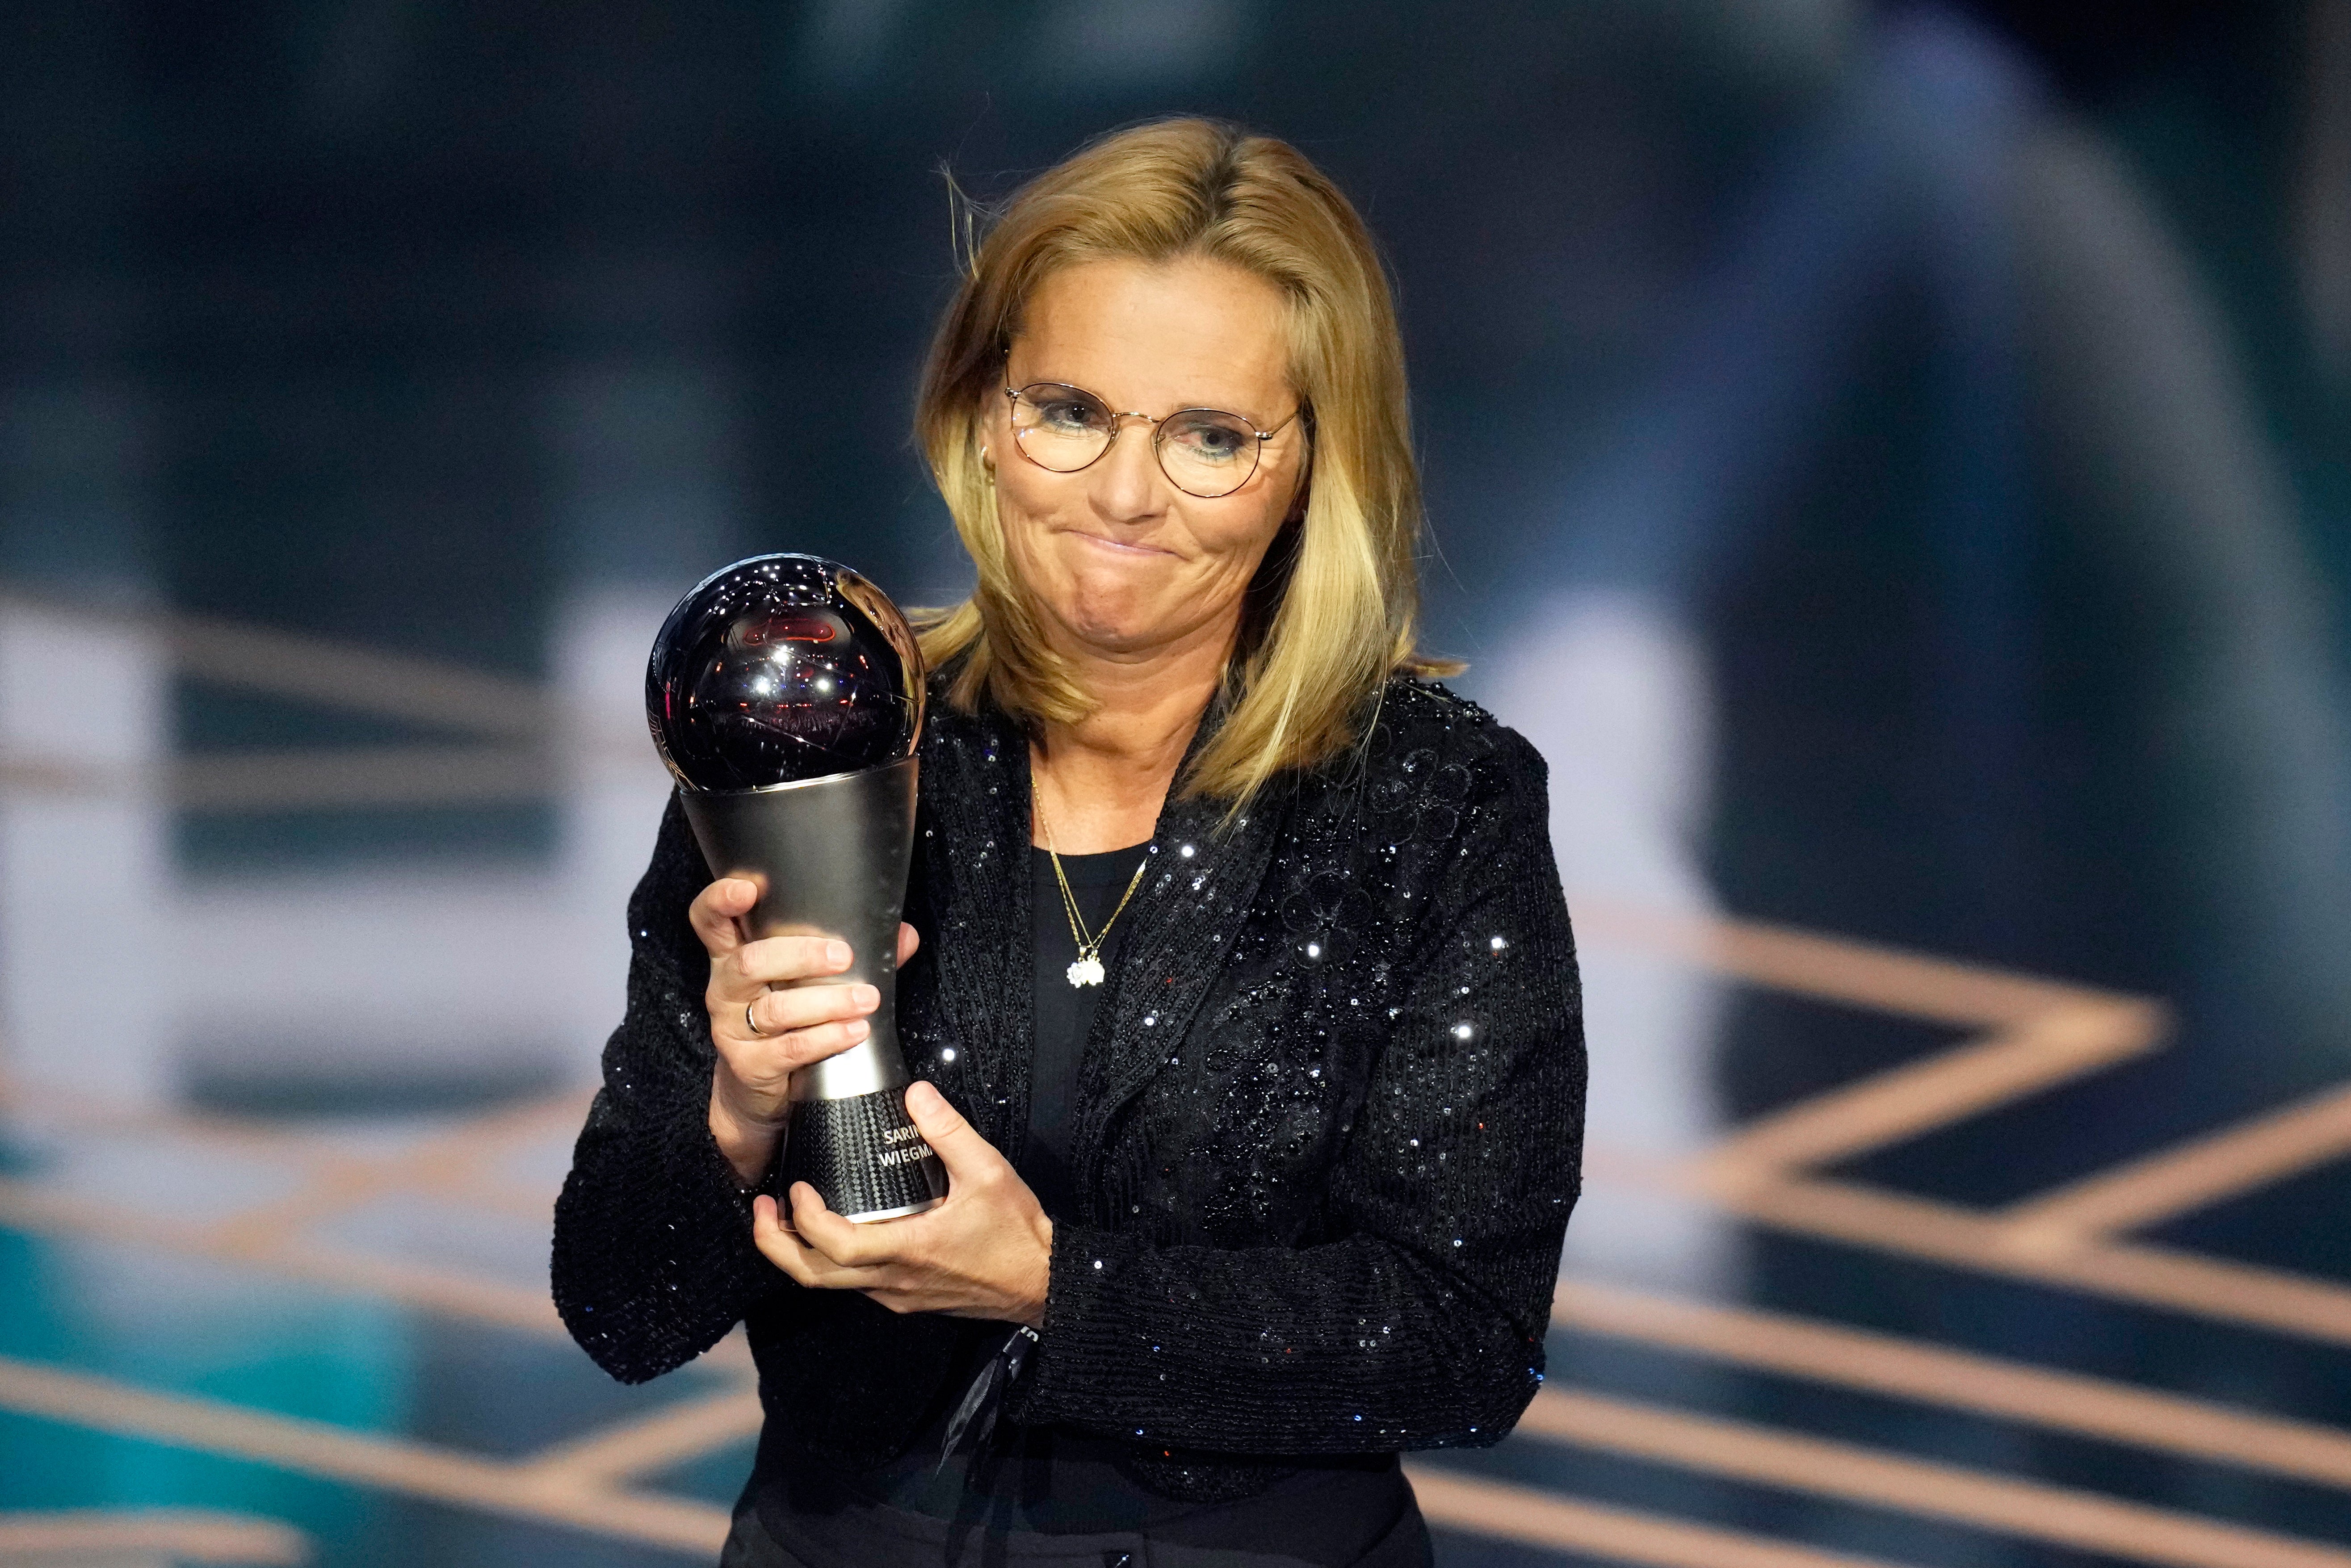 Sarina Wiegman was named the Fifa Best women’s coach on Monday night